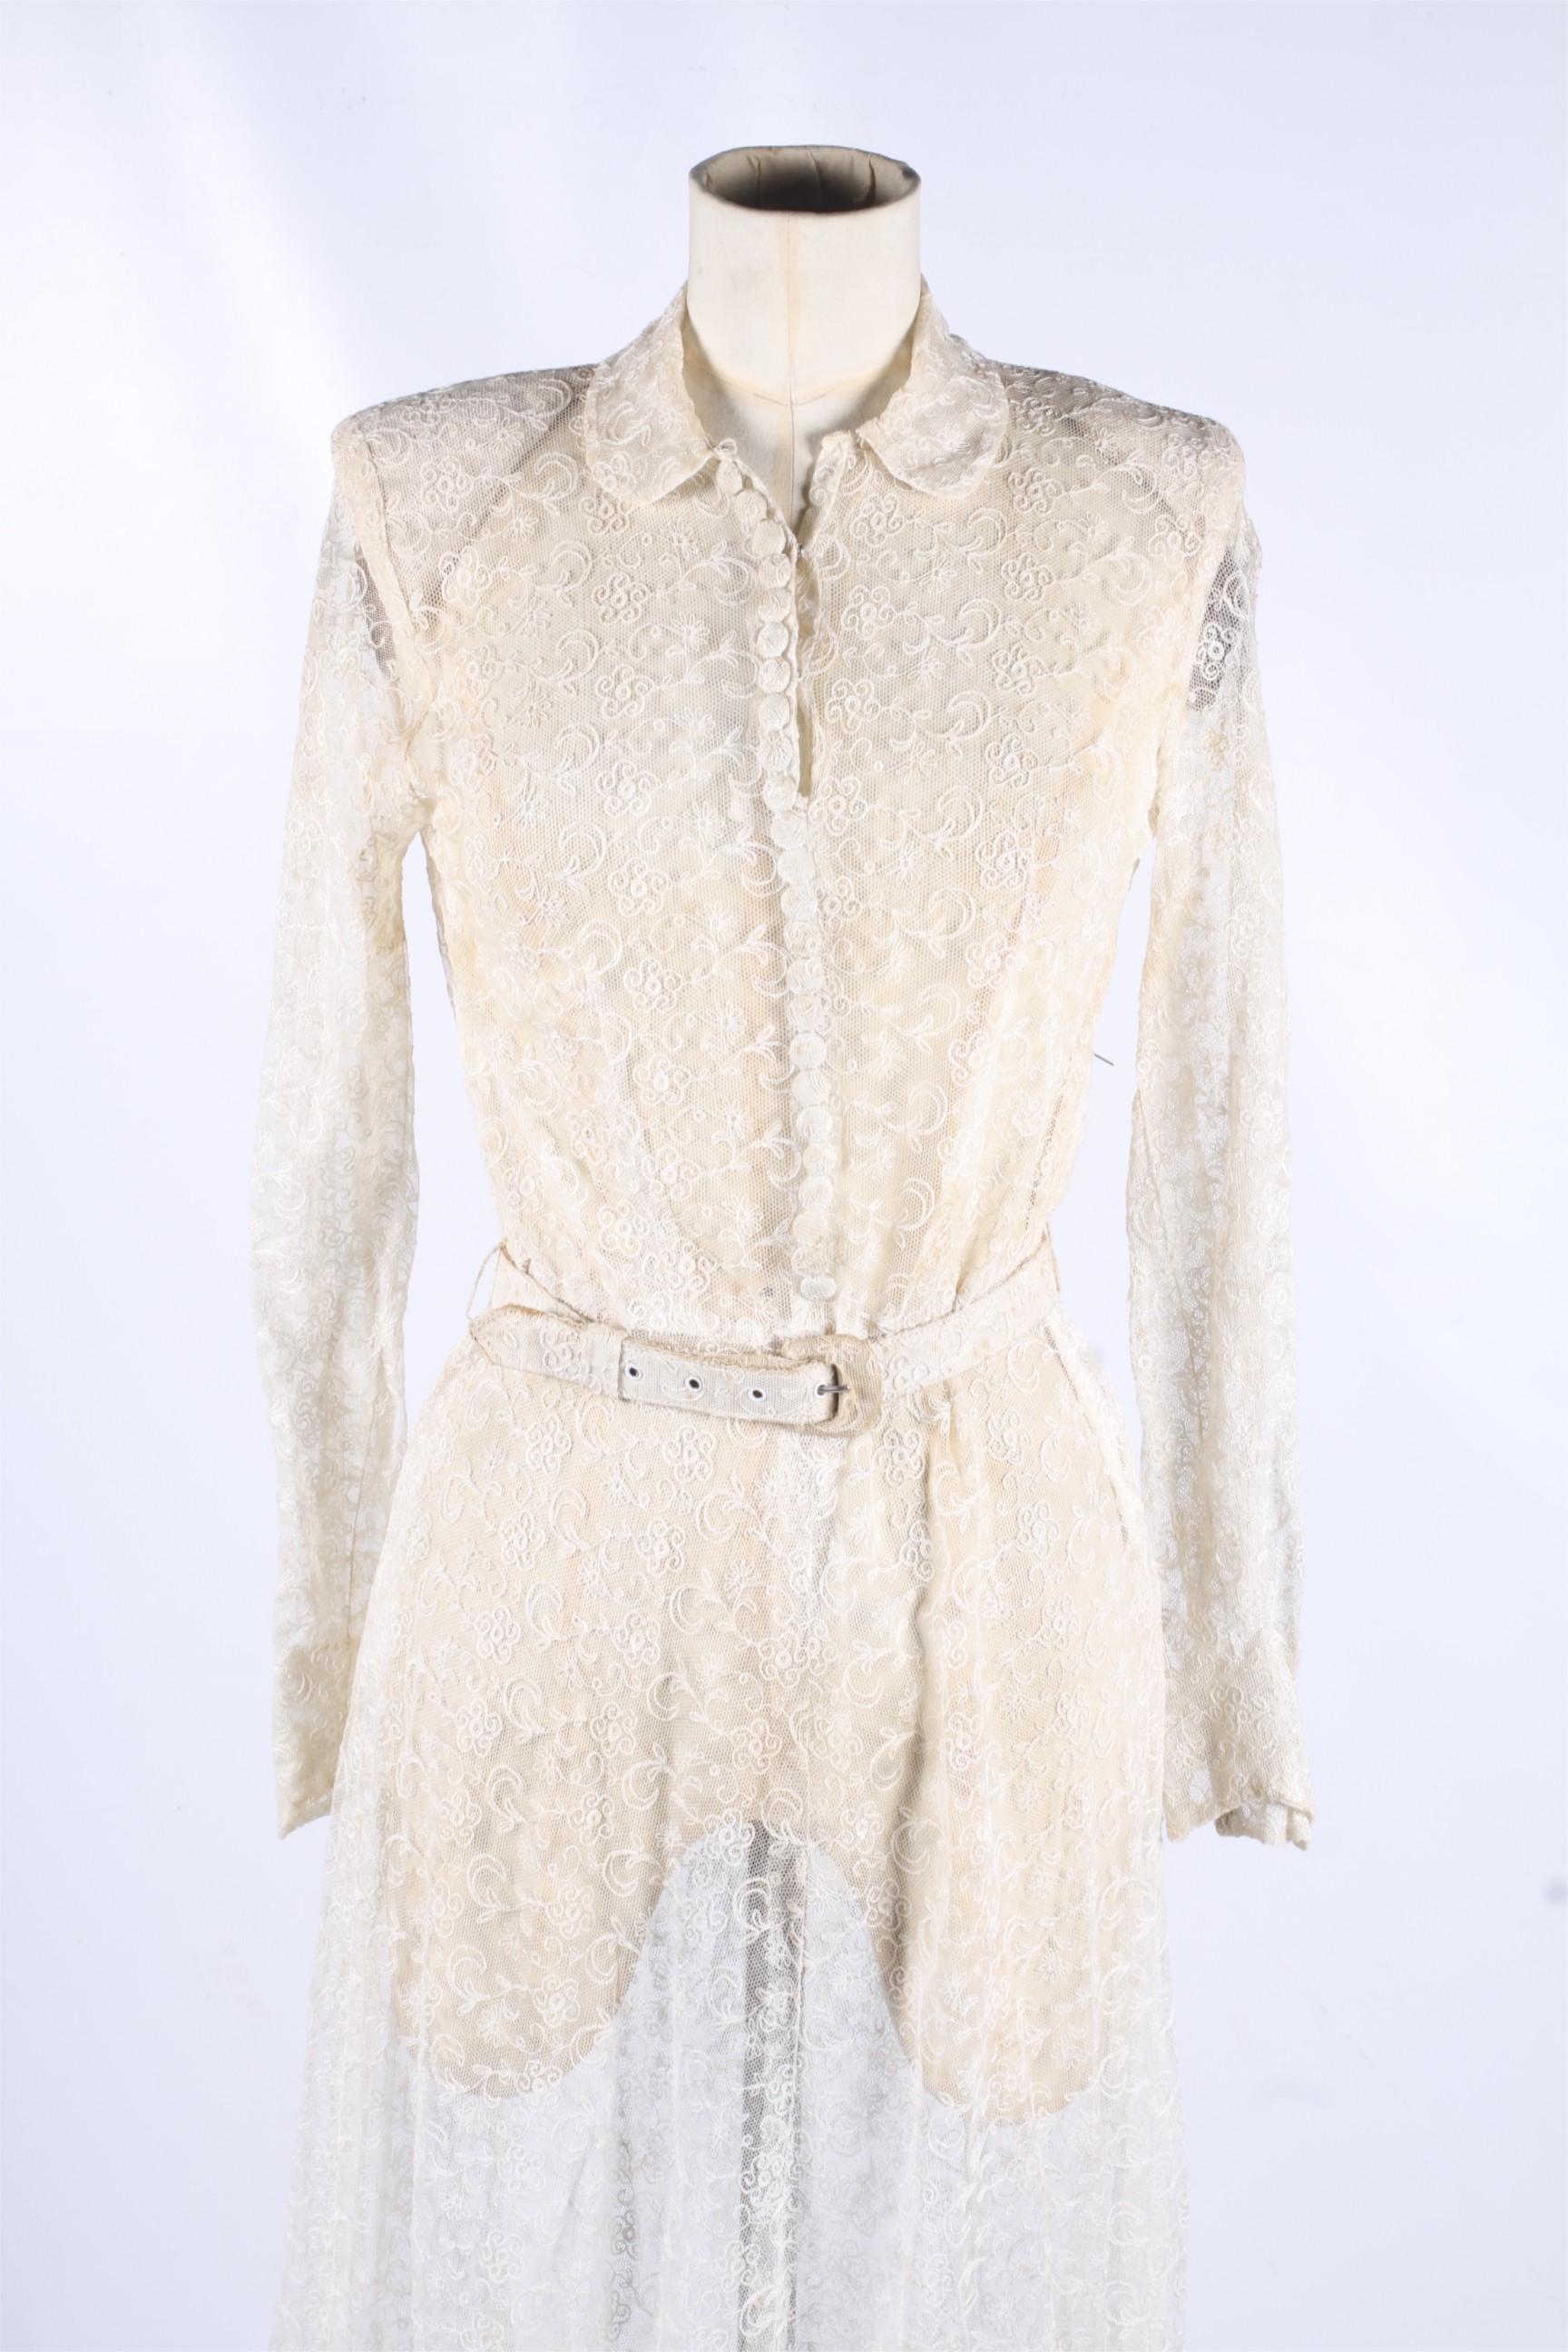 A late 19th/early 20th century dress. - Image 2 of 3